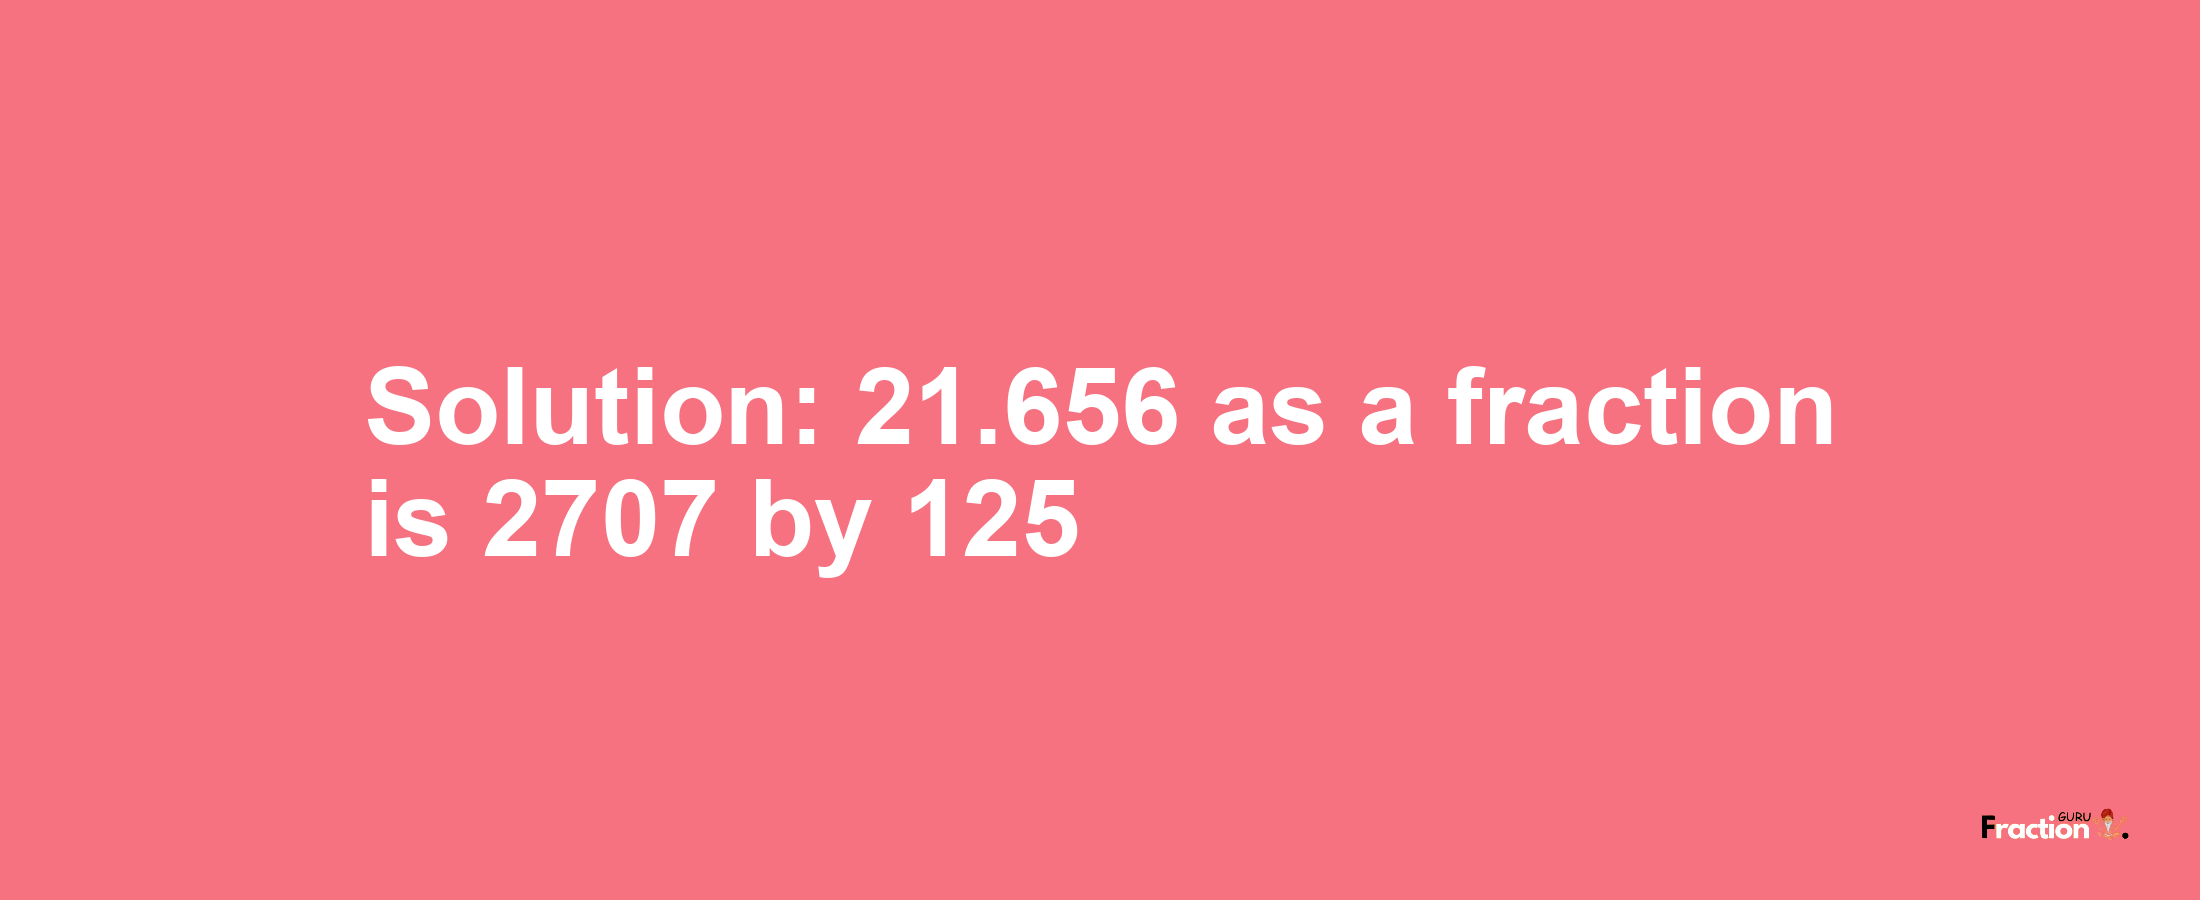 Solution:21.656 as a fraction is 2707/125